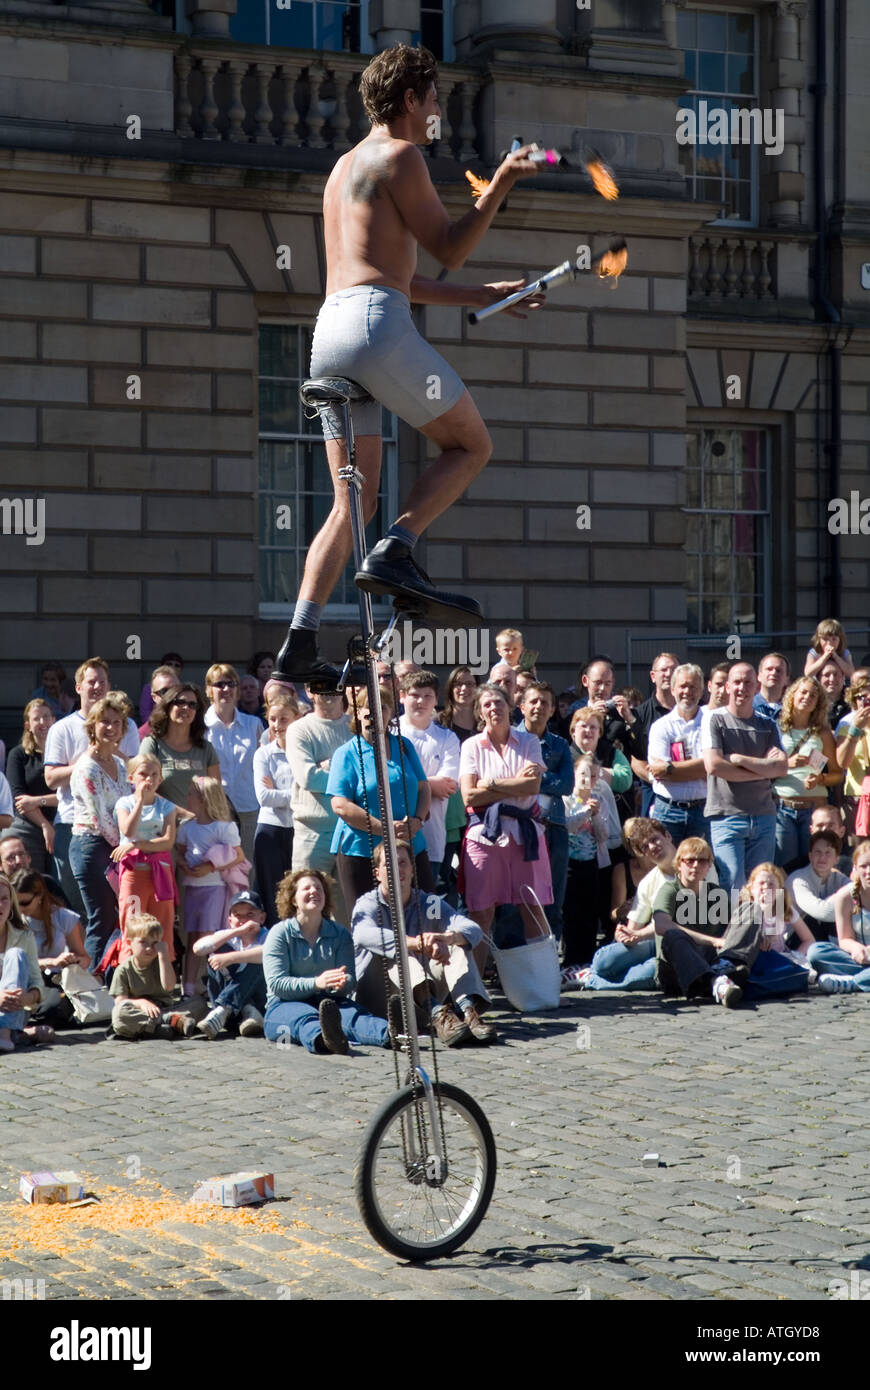 dh Edinburgh Fringe Festival ROYAL MILE EDINBURGH Crowd watching street entertainer mono cycle juggling with fire batons crow crowds performance Stock Photo